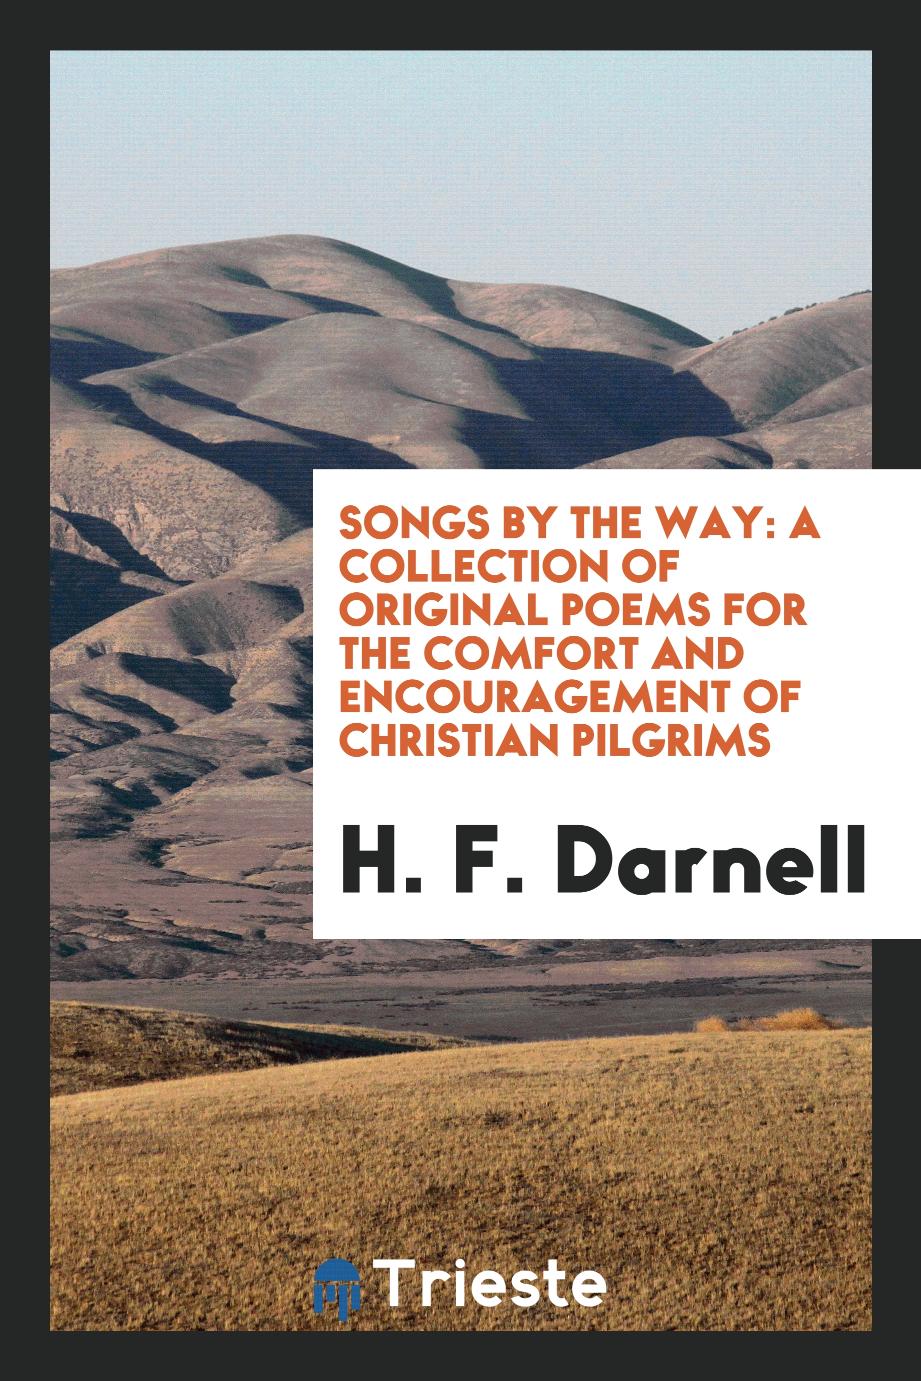 Songs by the way: a collection of original poems for the comfort and encouragement of Christian pilgrims